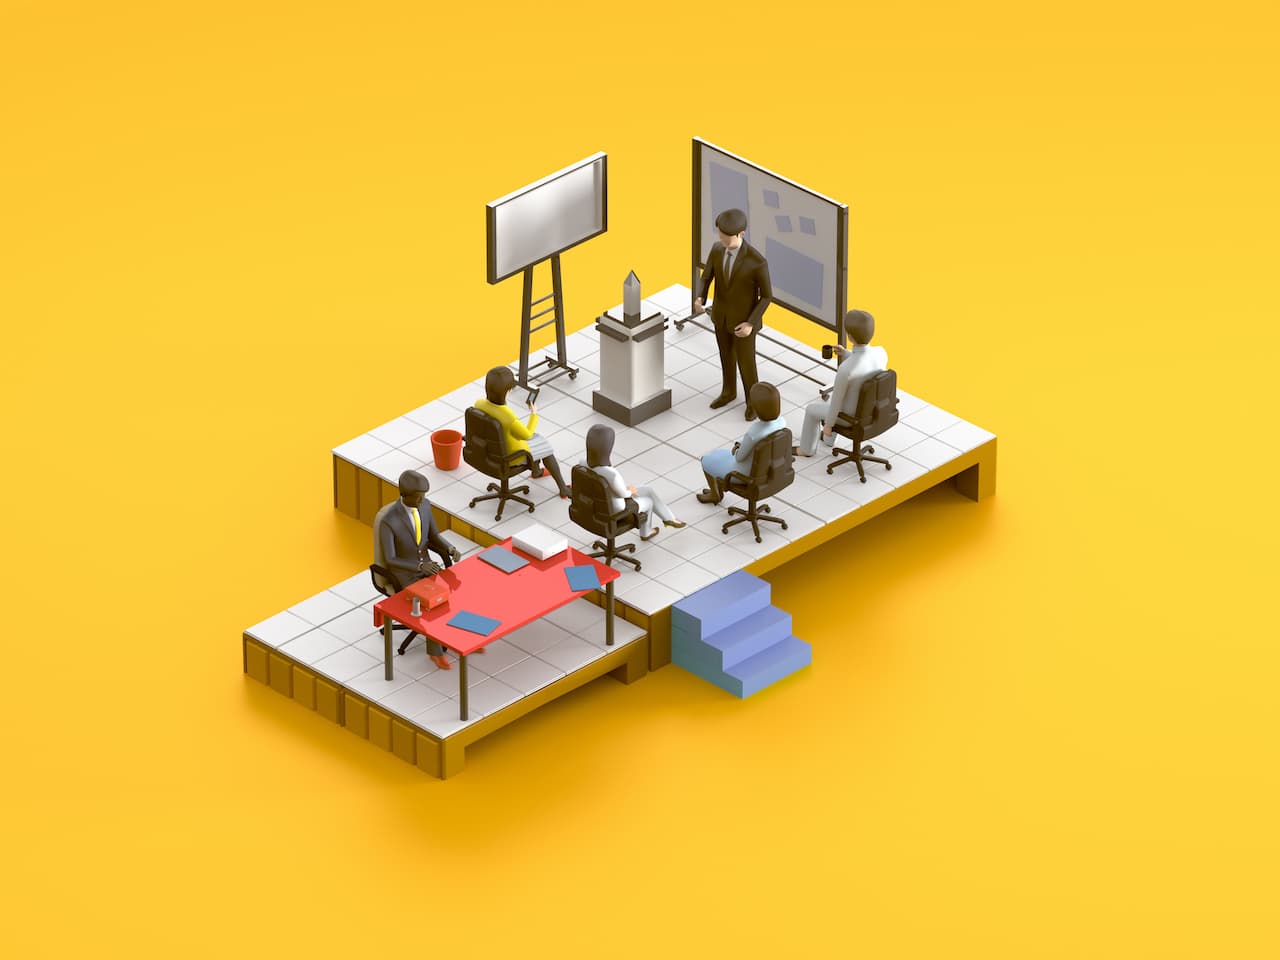 Illustration of people working in an office